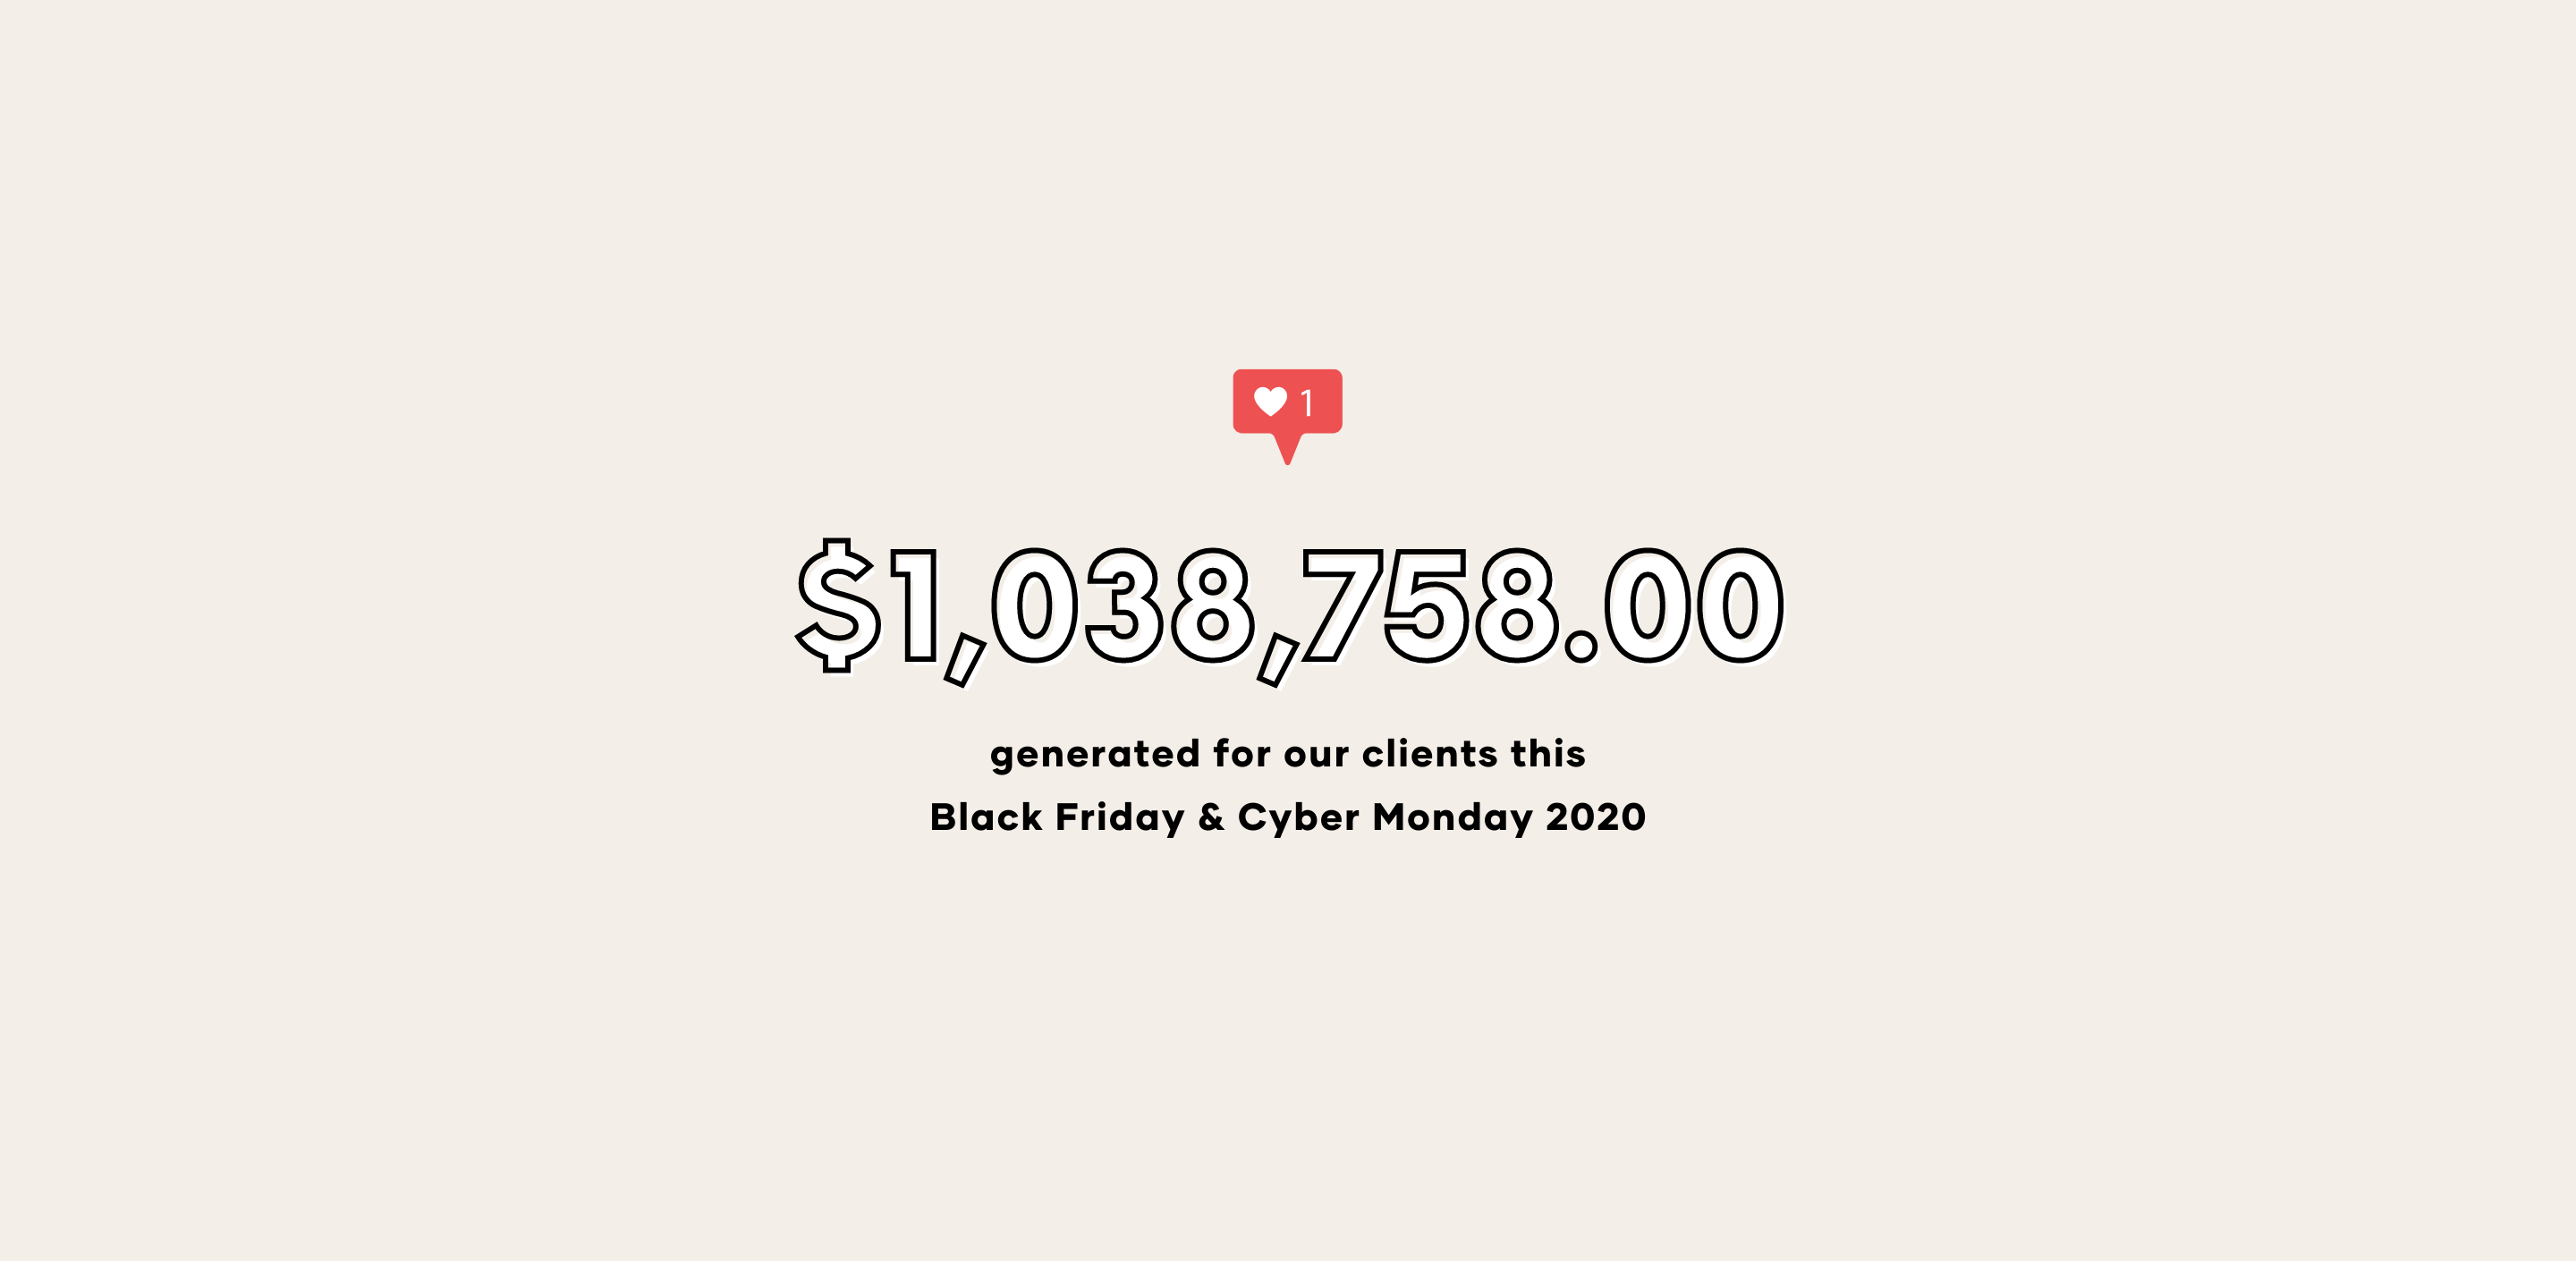 BFCM 2020 RECAP: $1,038,758 generated for our clients this Black Friday